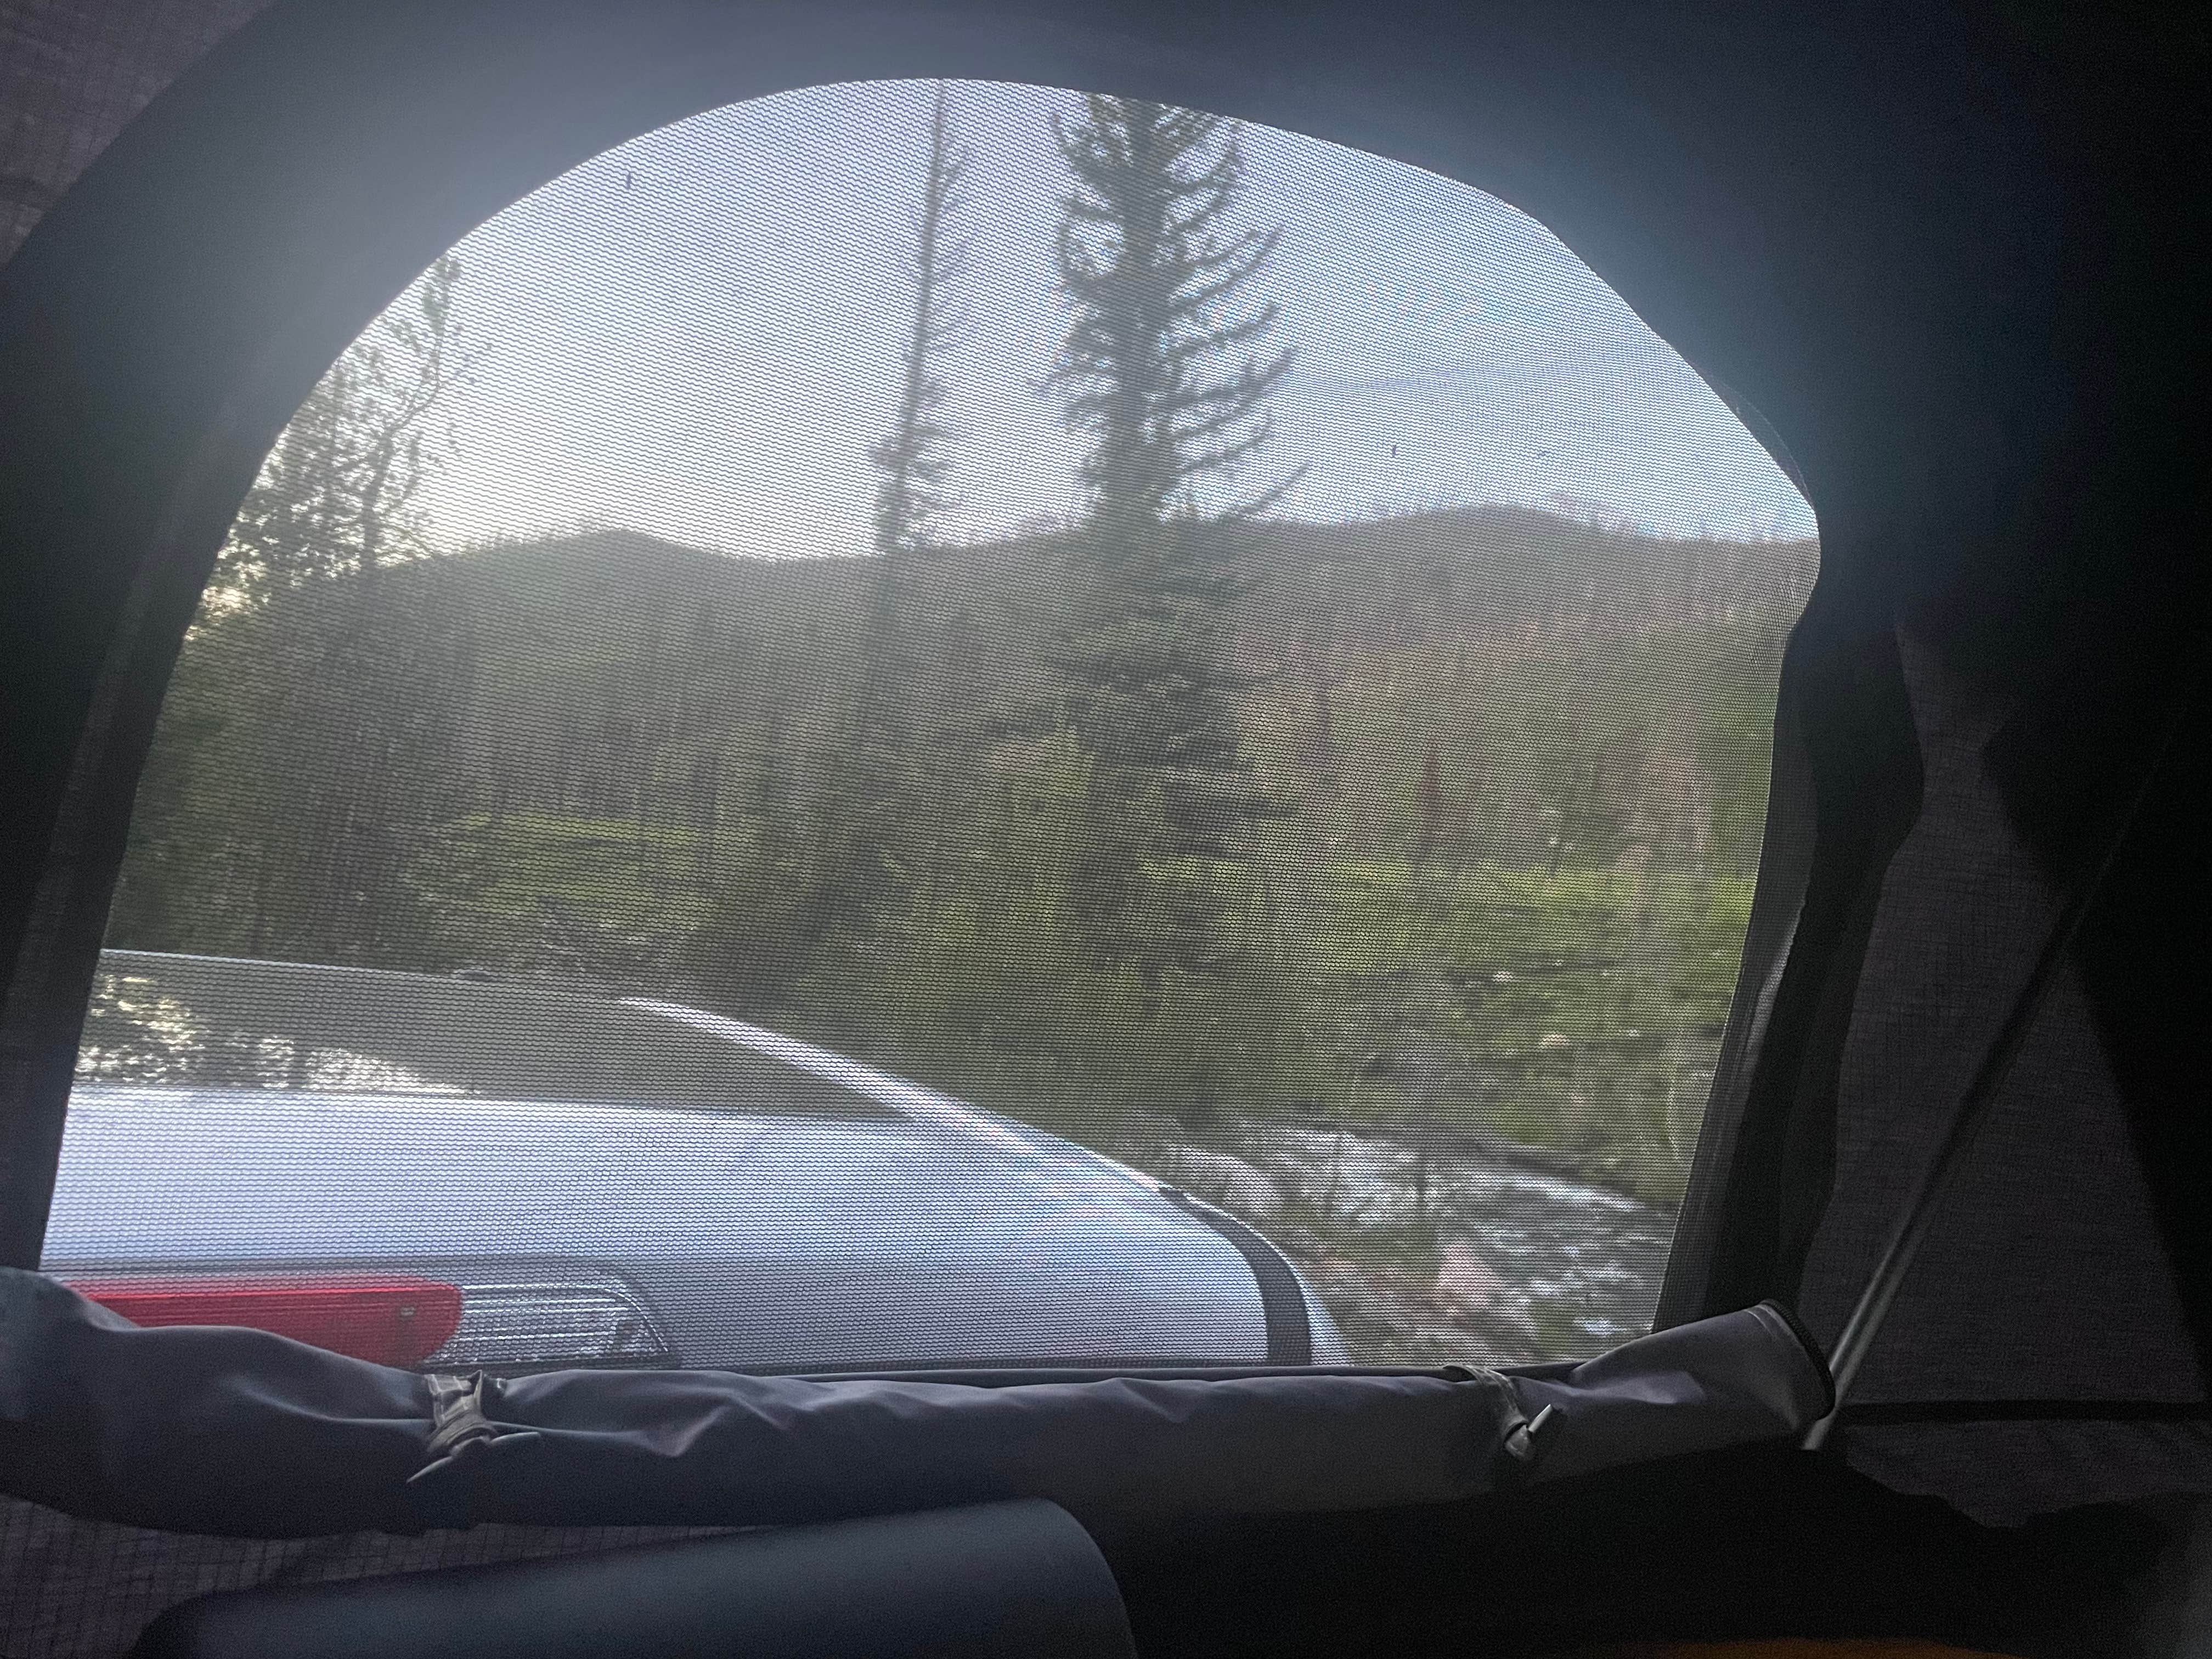 Camper submitted image from Ute Pass Dispersed Camping - 5